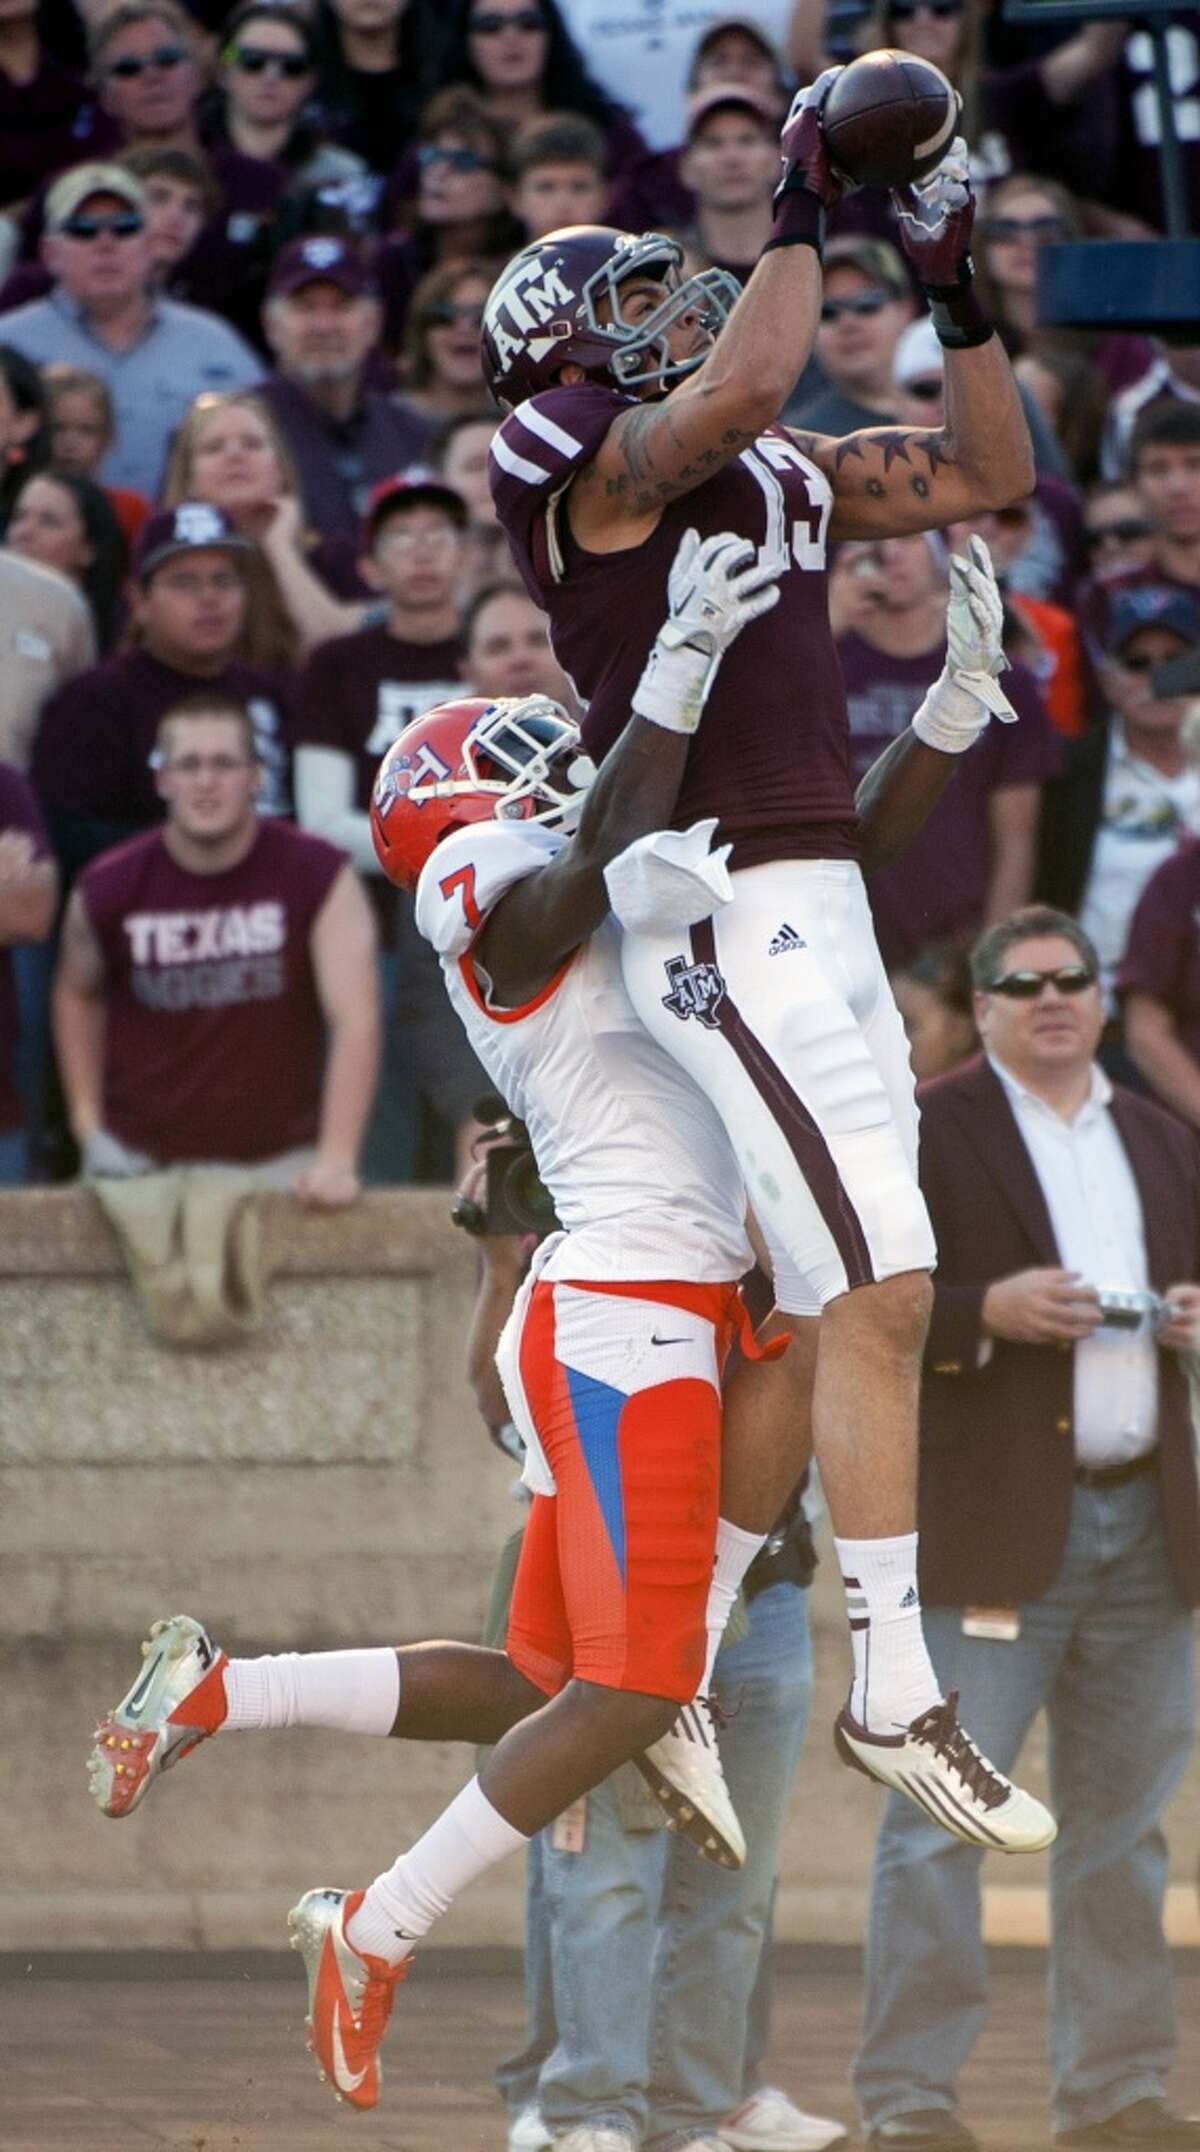 Texas A&M's Mike Evans (13) grabs a 13-yard touchdown pass over Sam Houston State's Dax Swanson (7) during the second quarter of an NCAA college football game, Saturday, Nov. 17, 2012, in College Station, Texas. (Dave Einsel / Associated Press)